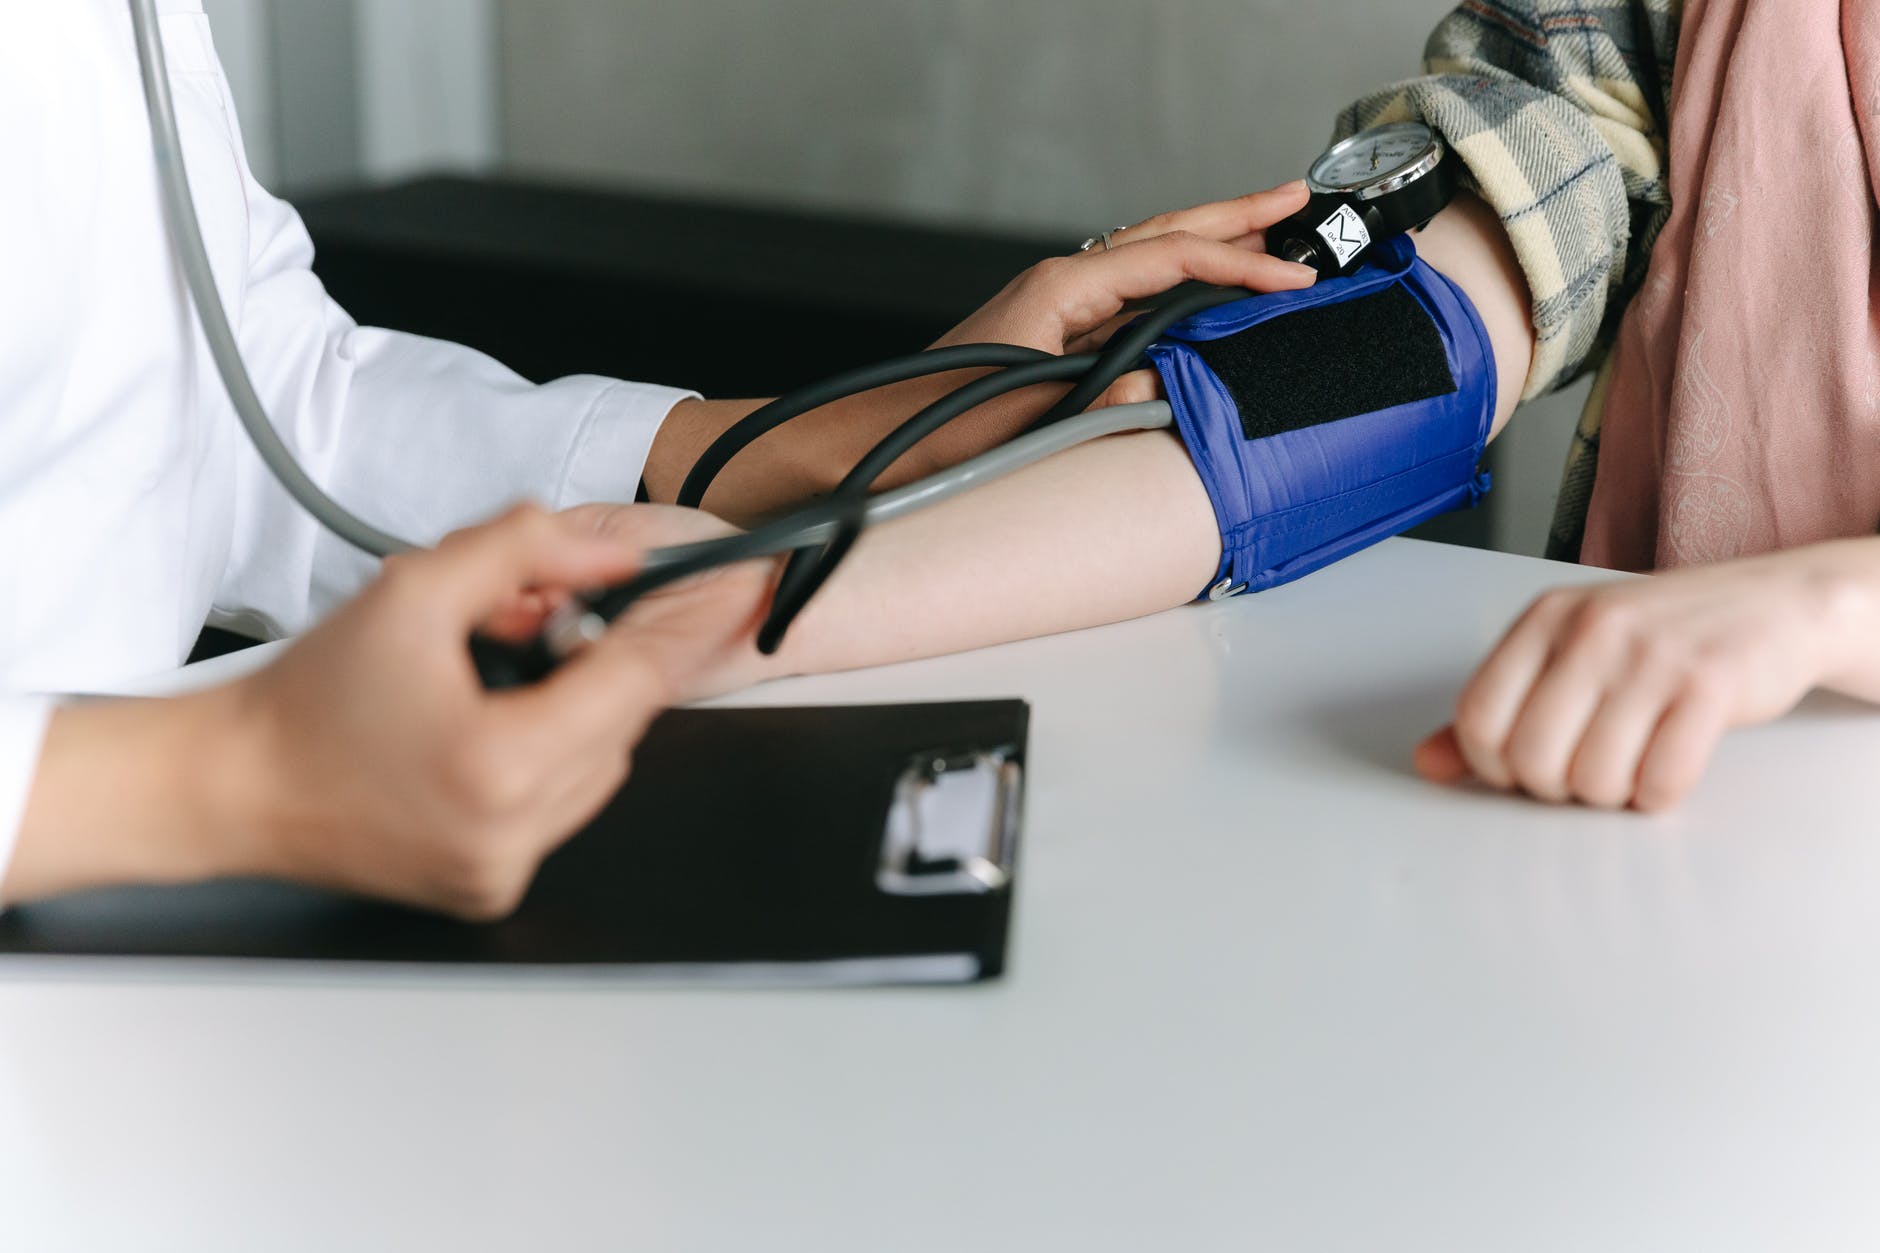 a healthcare worker measuring a patient s blood pressure using a sphygmomanometer